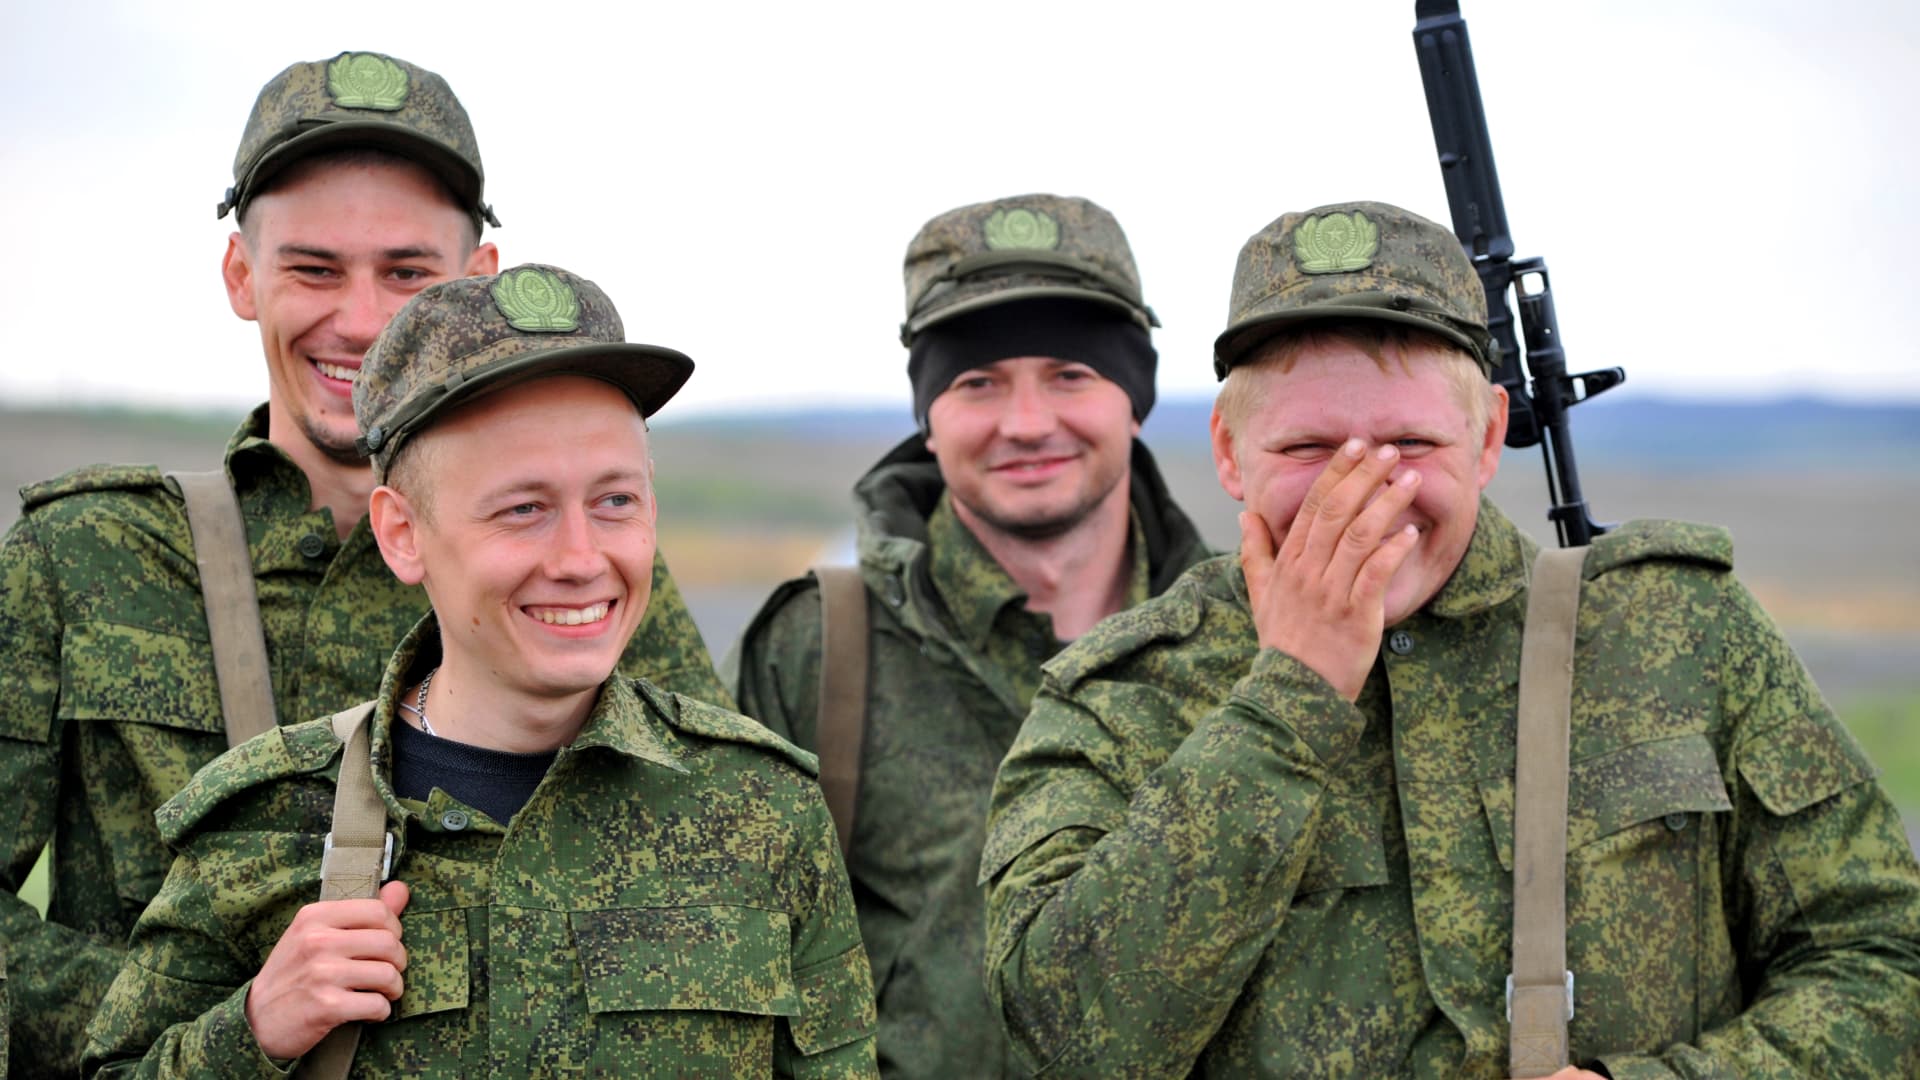 Russian citizens drafted during the partial mobilization begin their military trainings after a military call-up for the Russia-Ukraine war in Rostov, Russia on October 04, 2022.